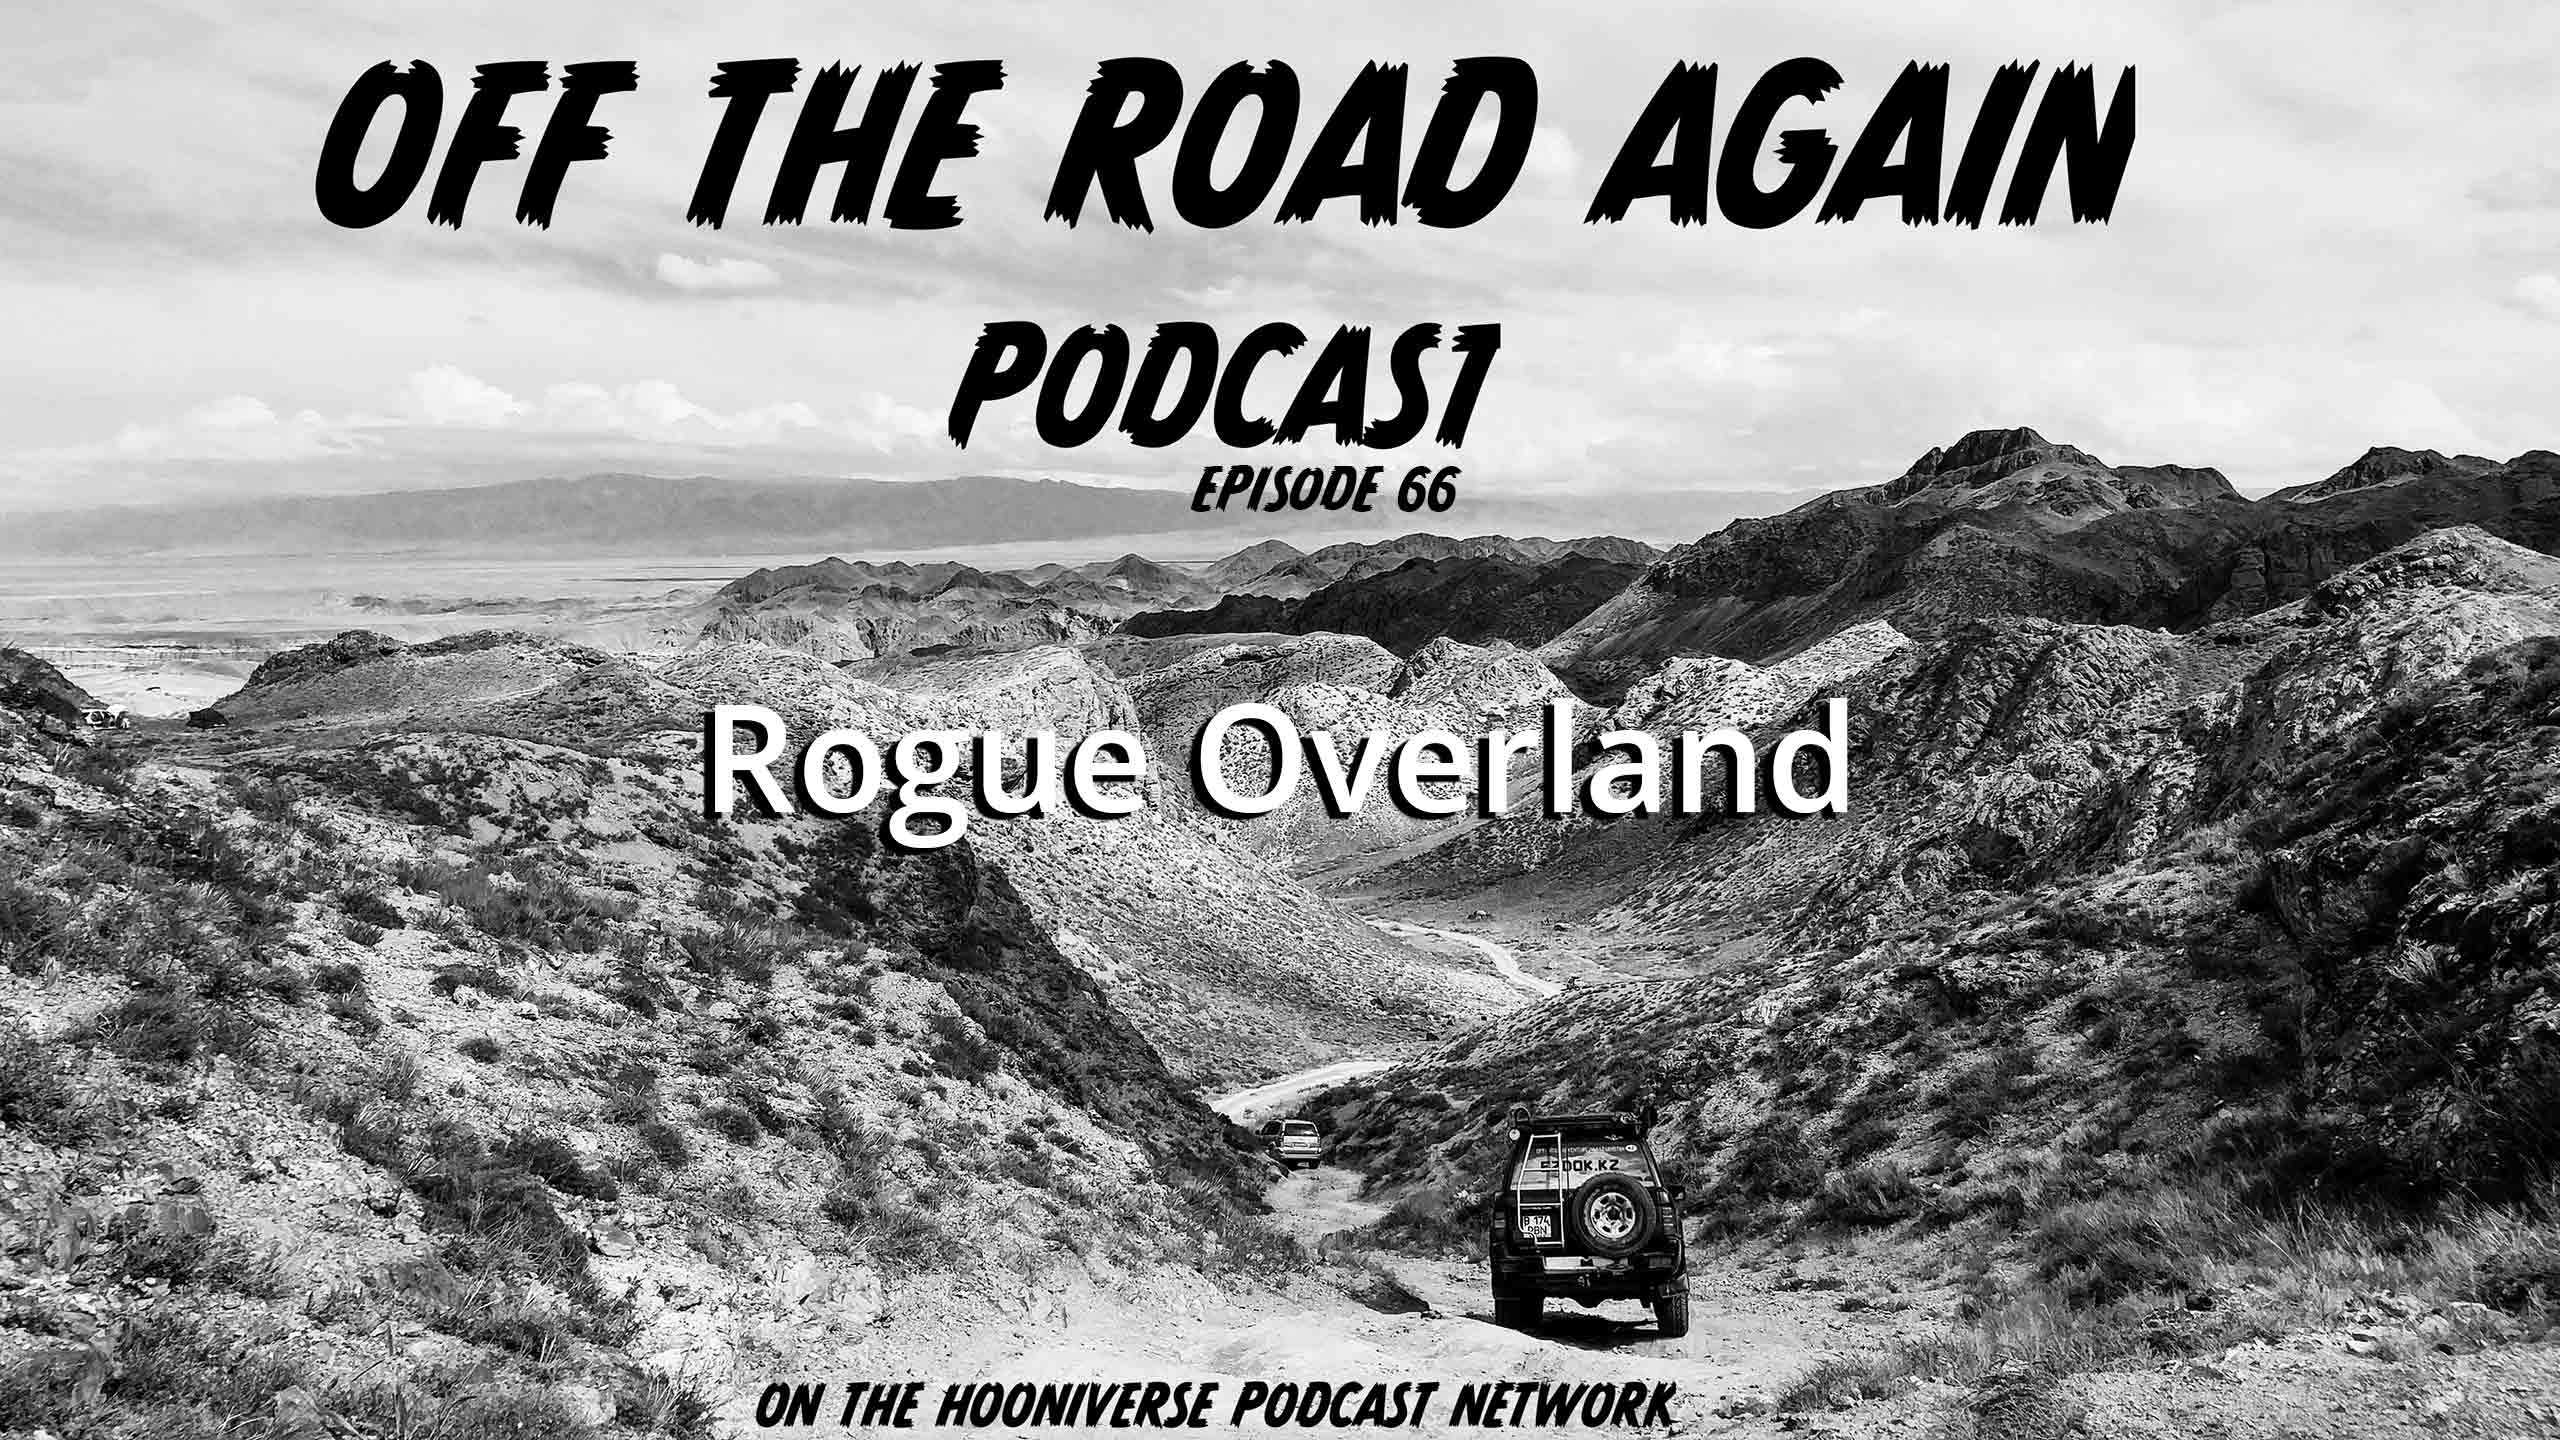 Rogue-Overland-Off-The-Road-Again-Podcast-Episode-66